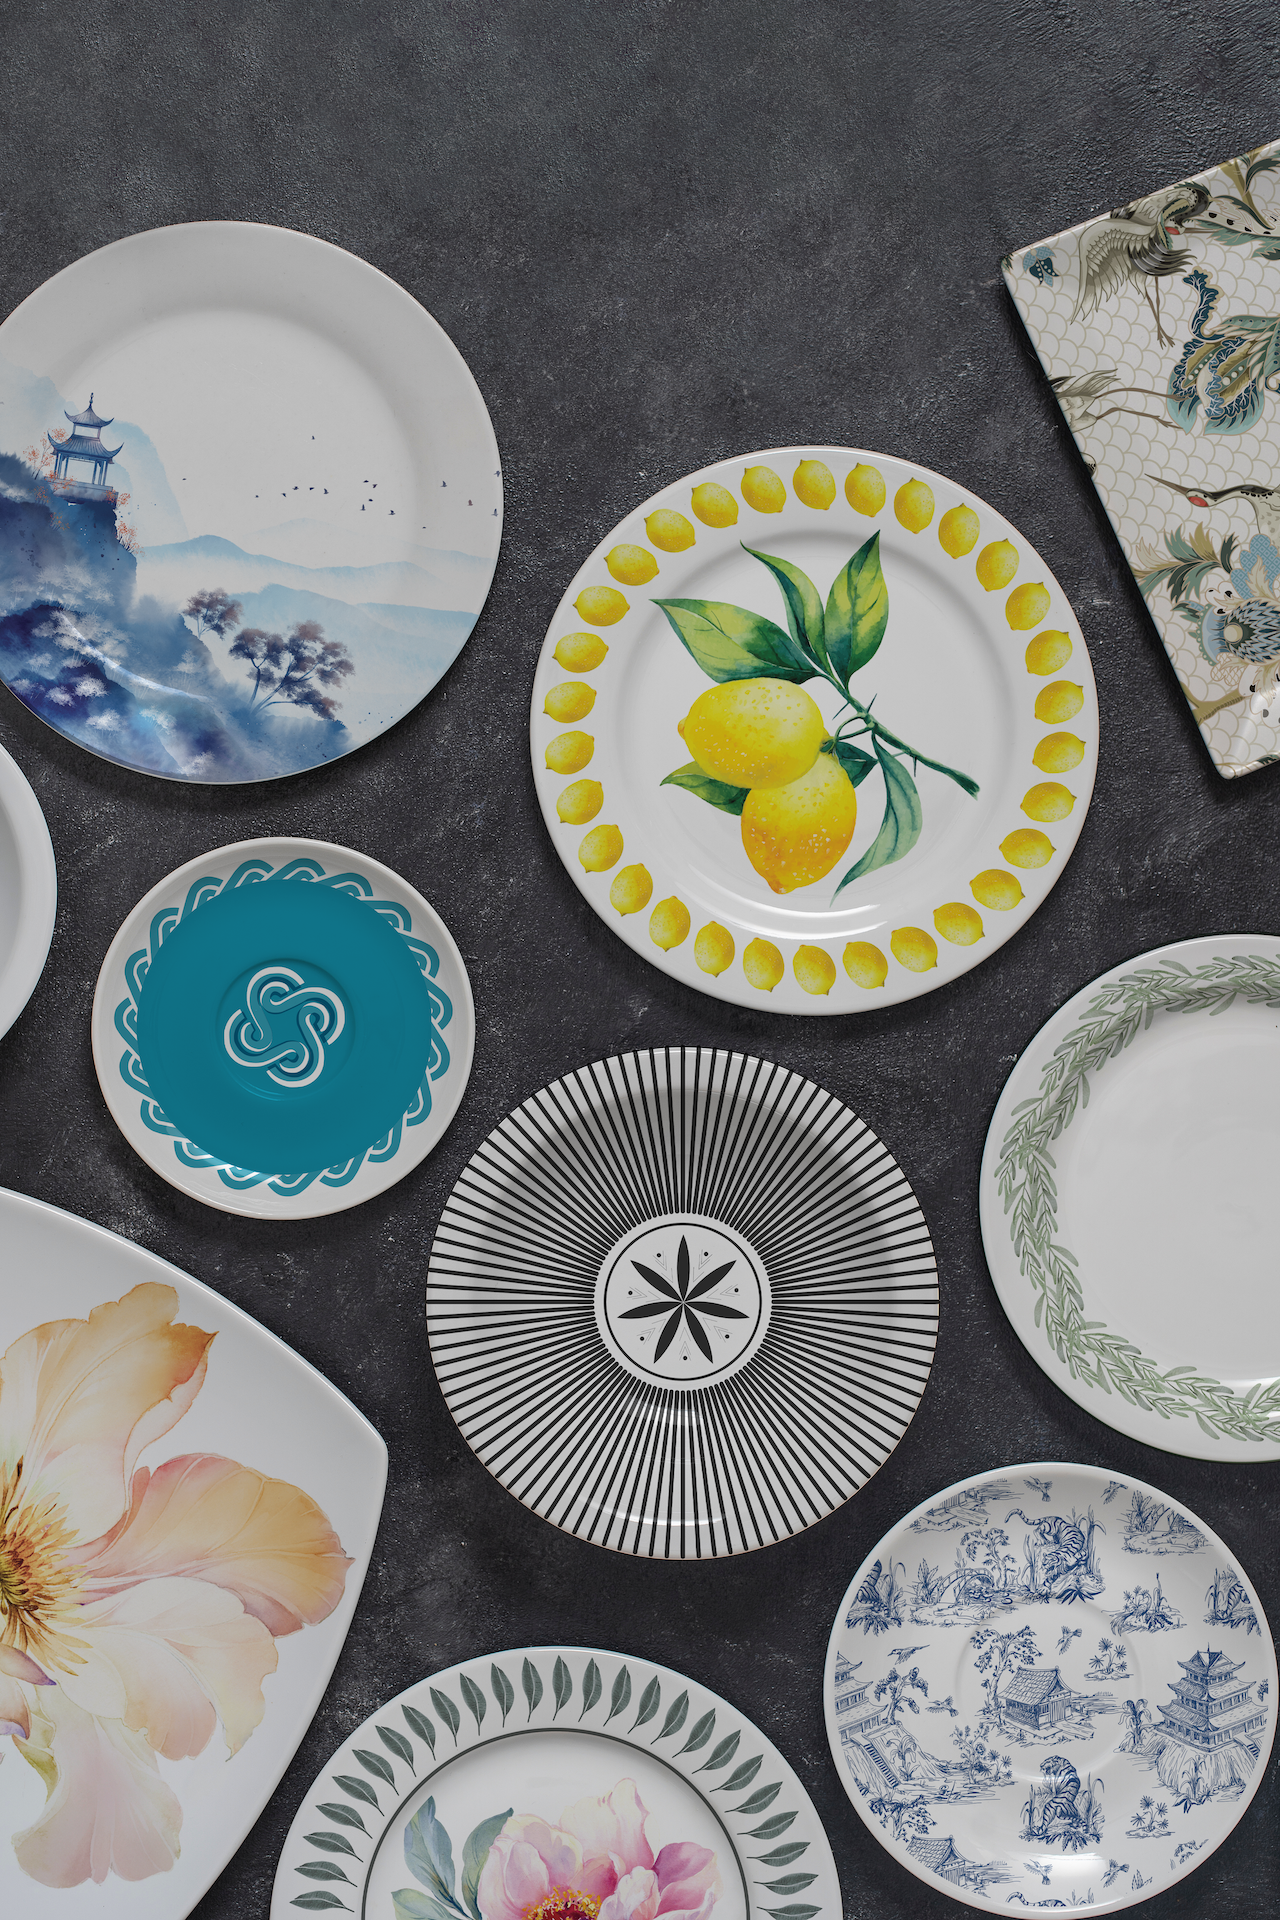 A variety of ceramic dishes with different printed patterns on a table.